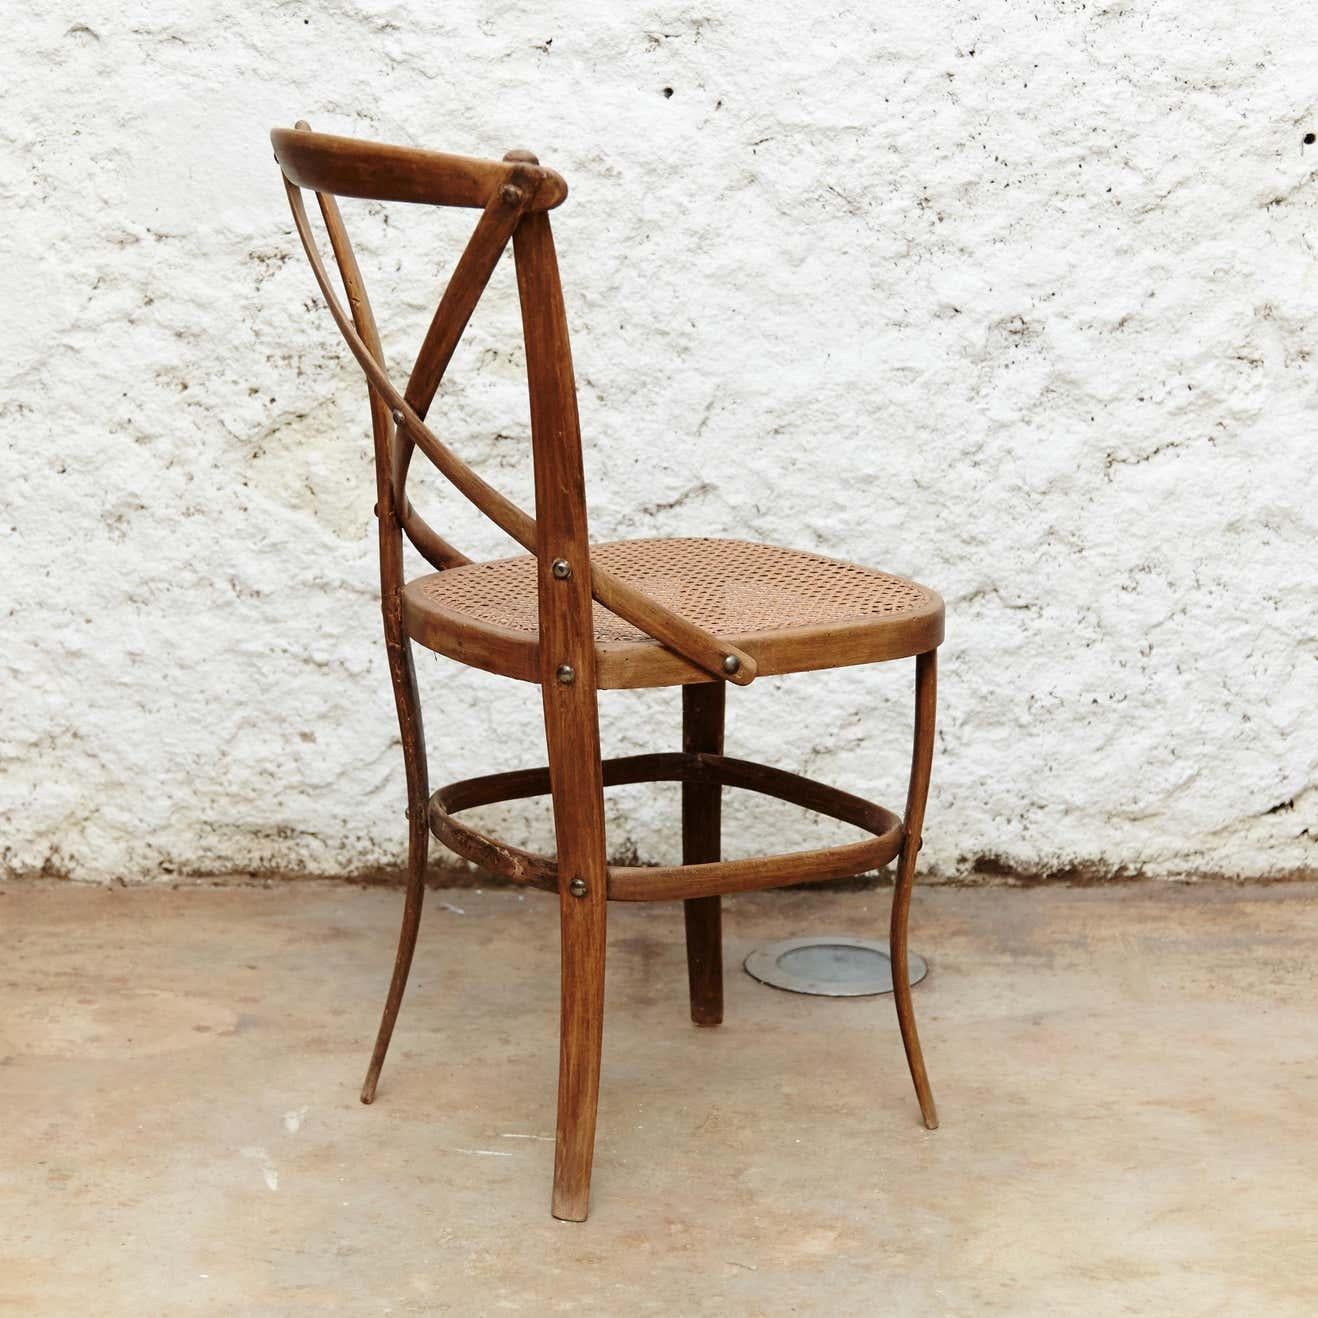 Arts and Crafts Thonet Wood and Rattan Chair Number 91 by August Thonet, circa 1920